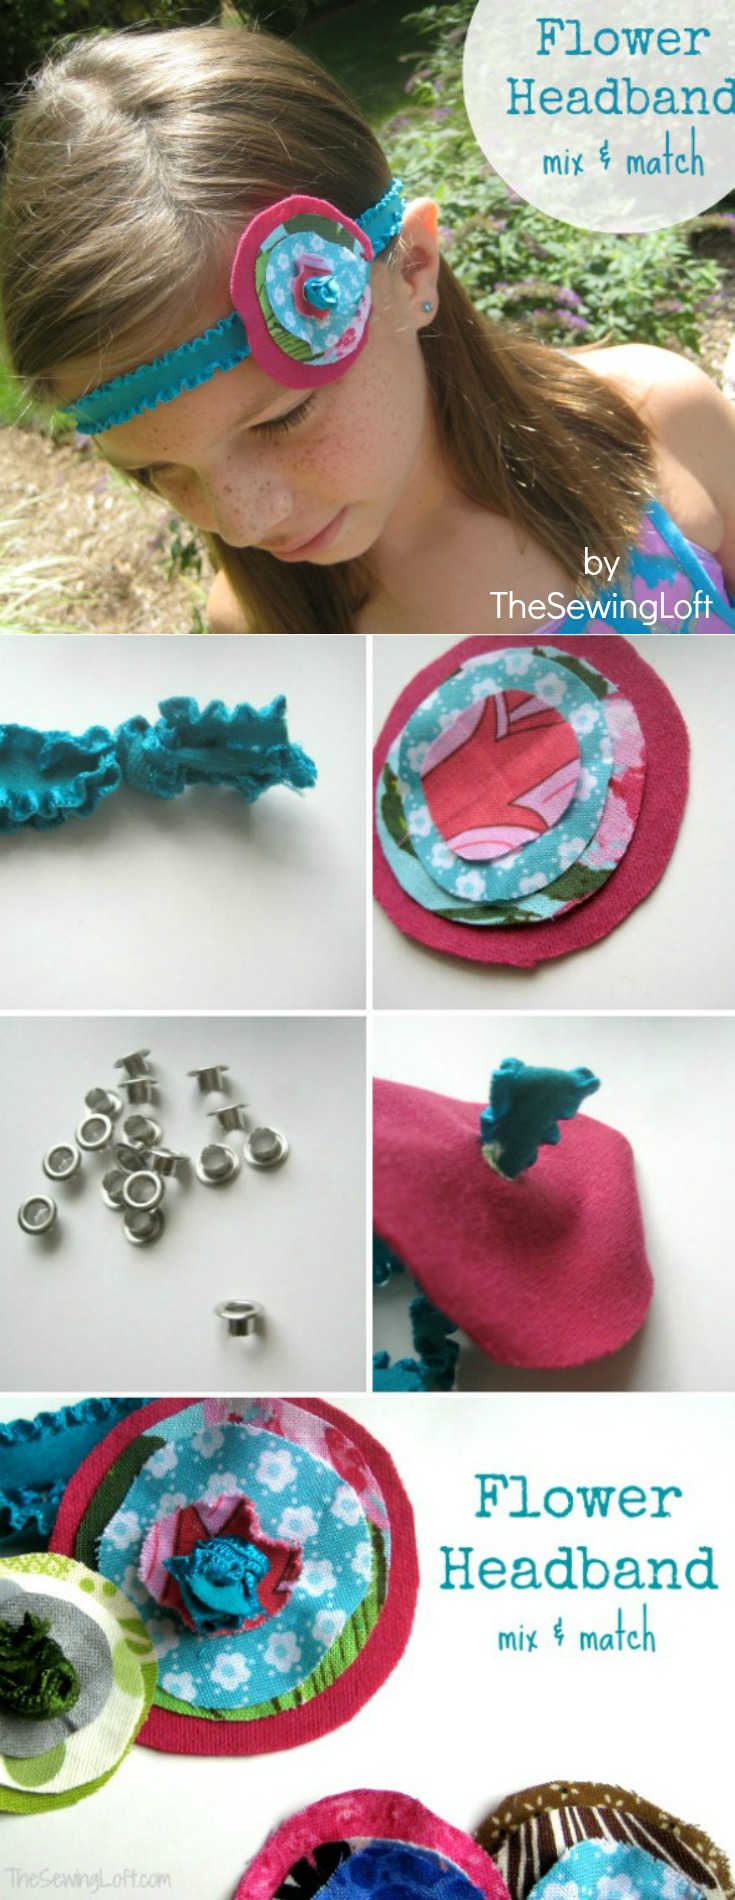 No sewing is required for this easy project! Transform a few pieces of scrap fabric into an elastic headband in minutes. The Sewing Loft